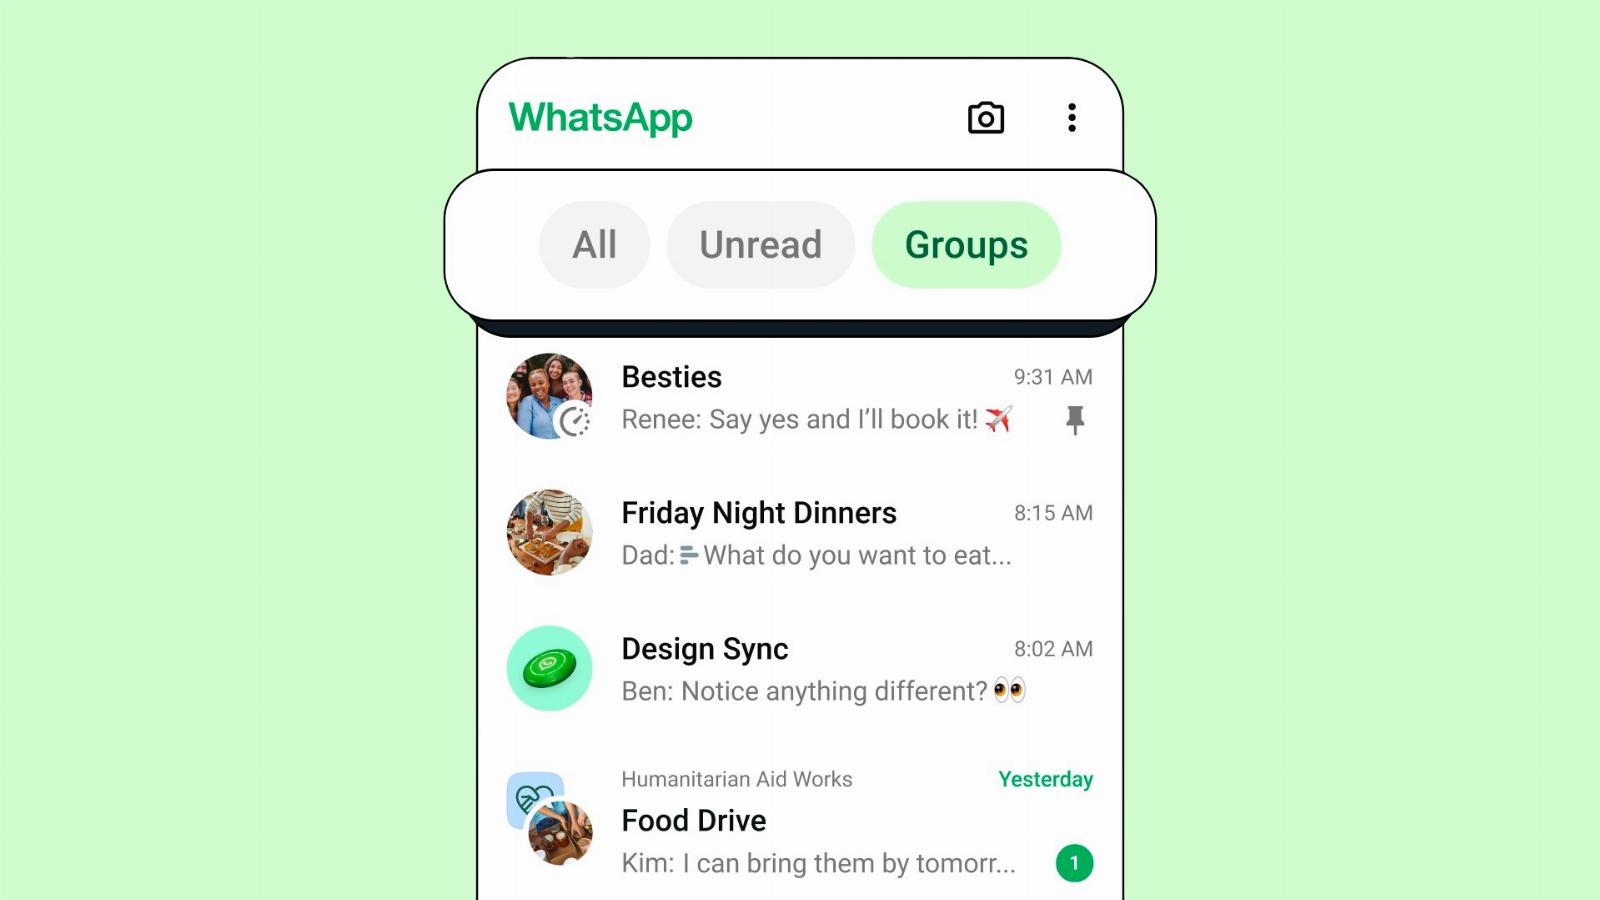 WhatsApp is adding filters to easily find messages